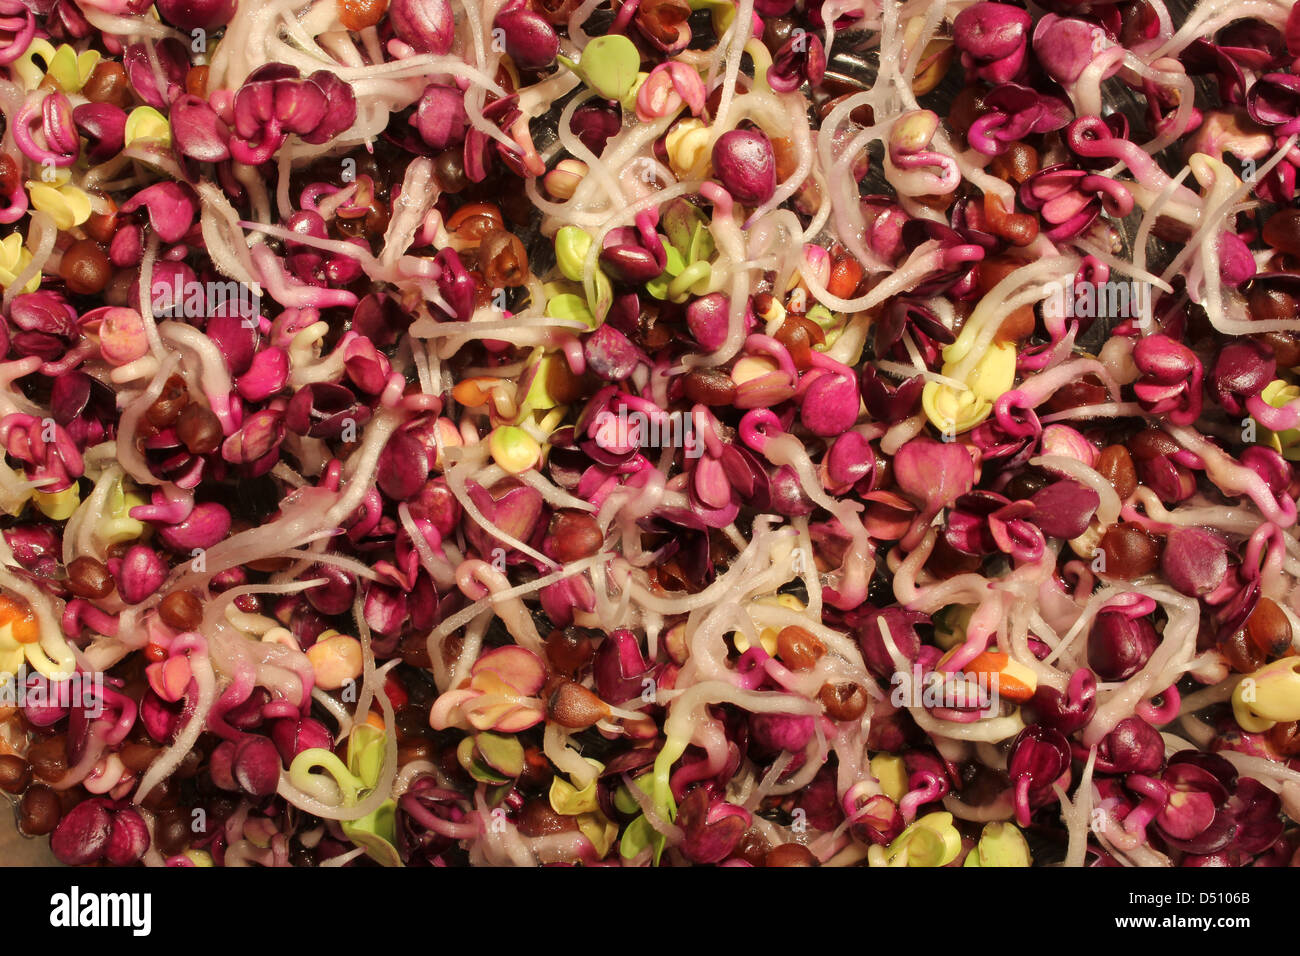 Tasty and colorful radish sprouts - closeup view Stock Photo